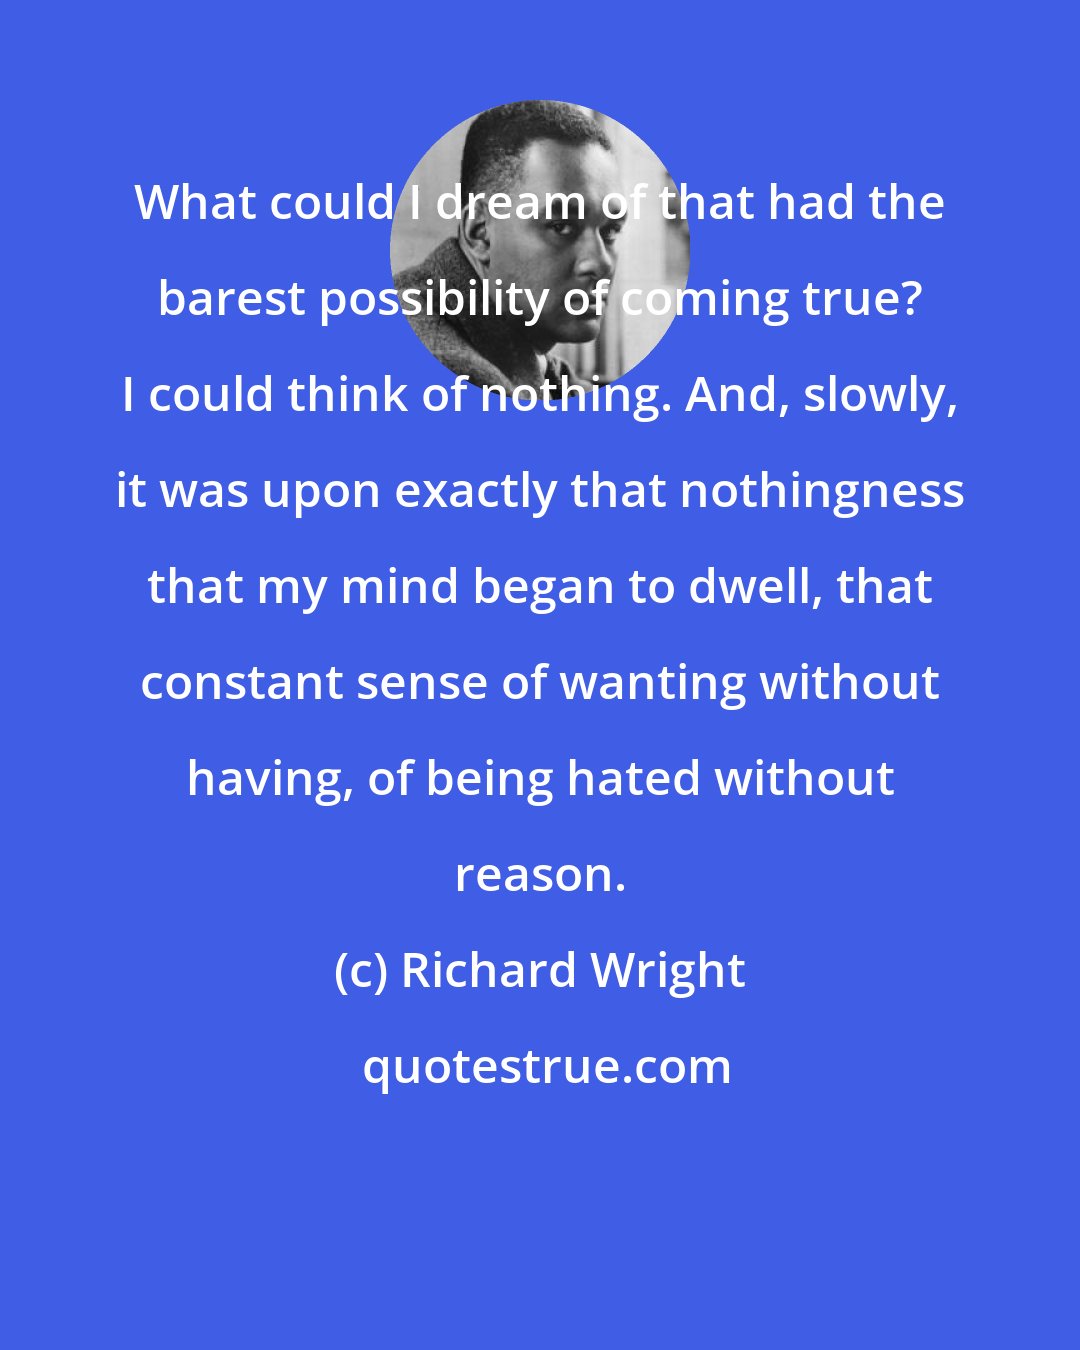 Richard Wright: What could I dream of that had the barest possibility of coming true? I could think of nothing. And, slowly, it was upon exactly that nothingness that my mind began to dwell, that constant sense of wanting without having, of being hated without reason.